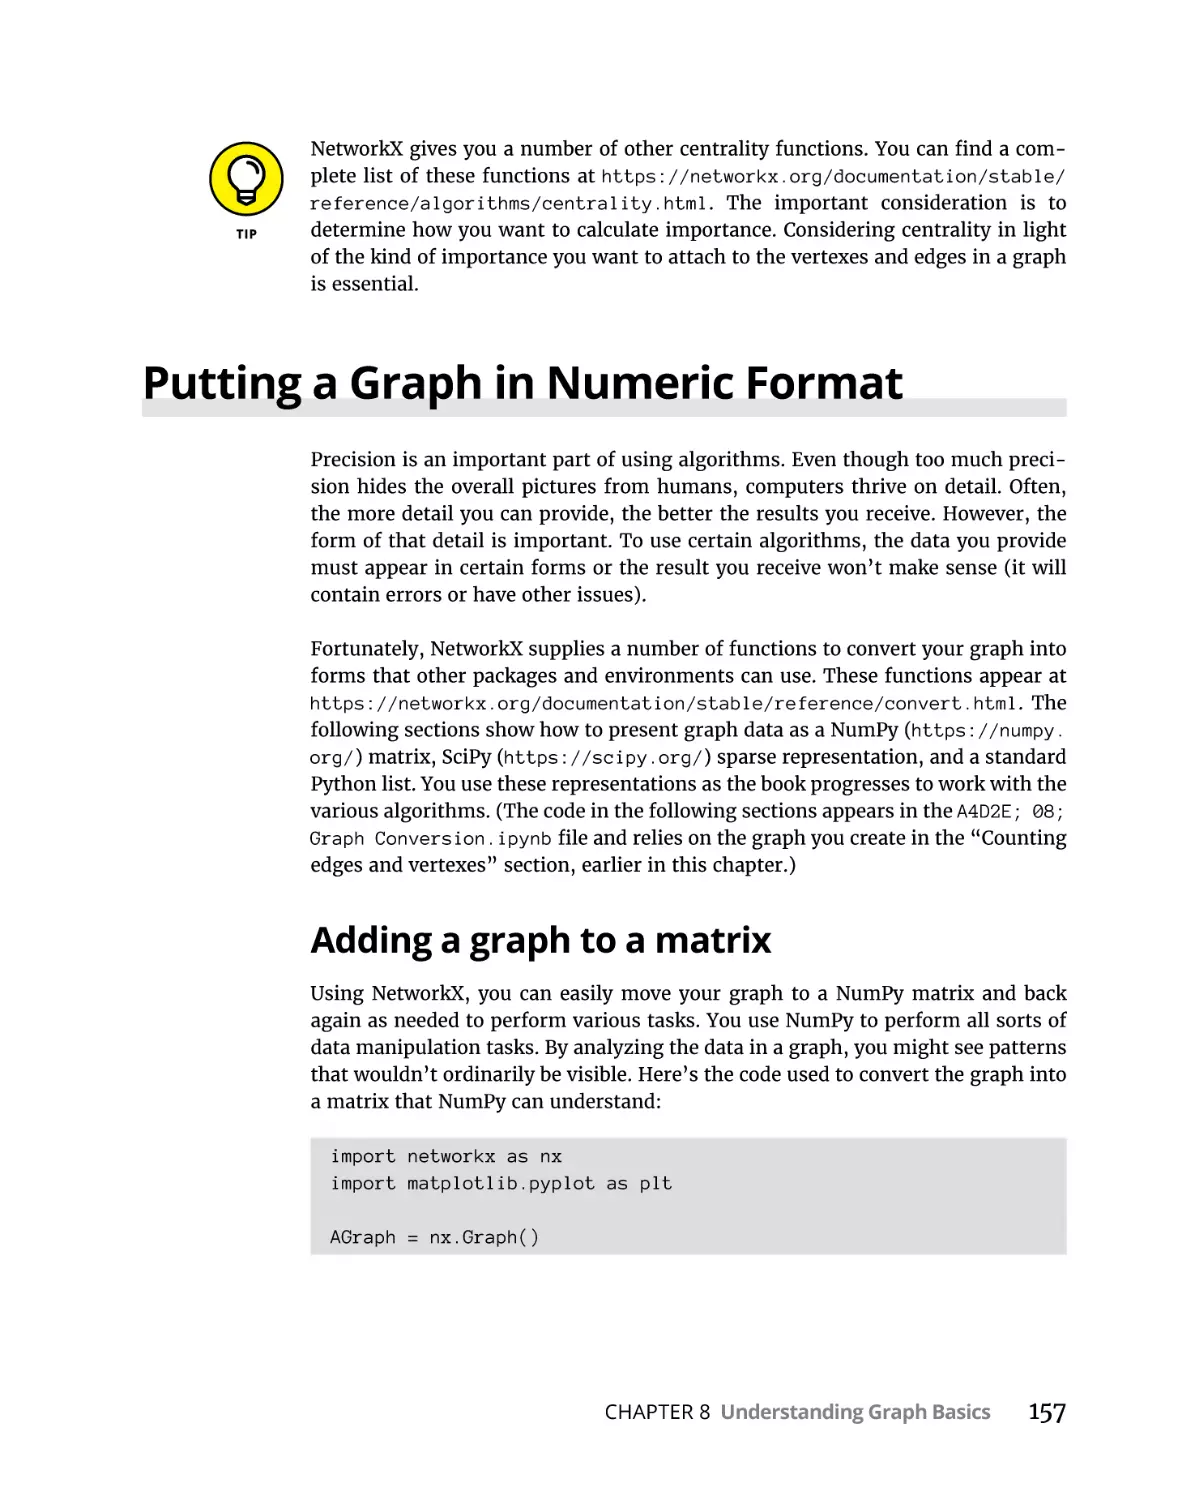 Putting a Graph in Numeric Format
Adding a graph to a matrix